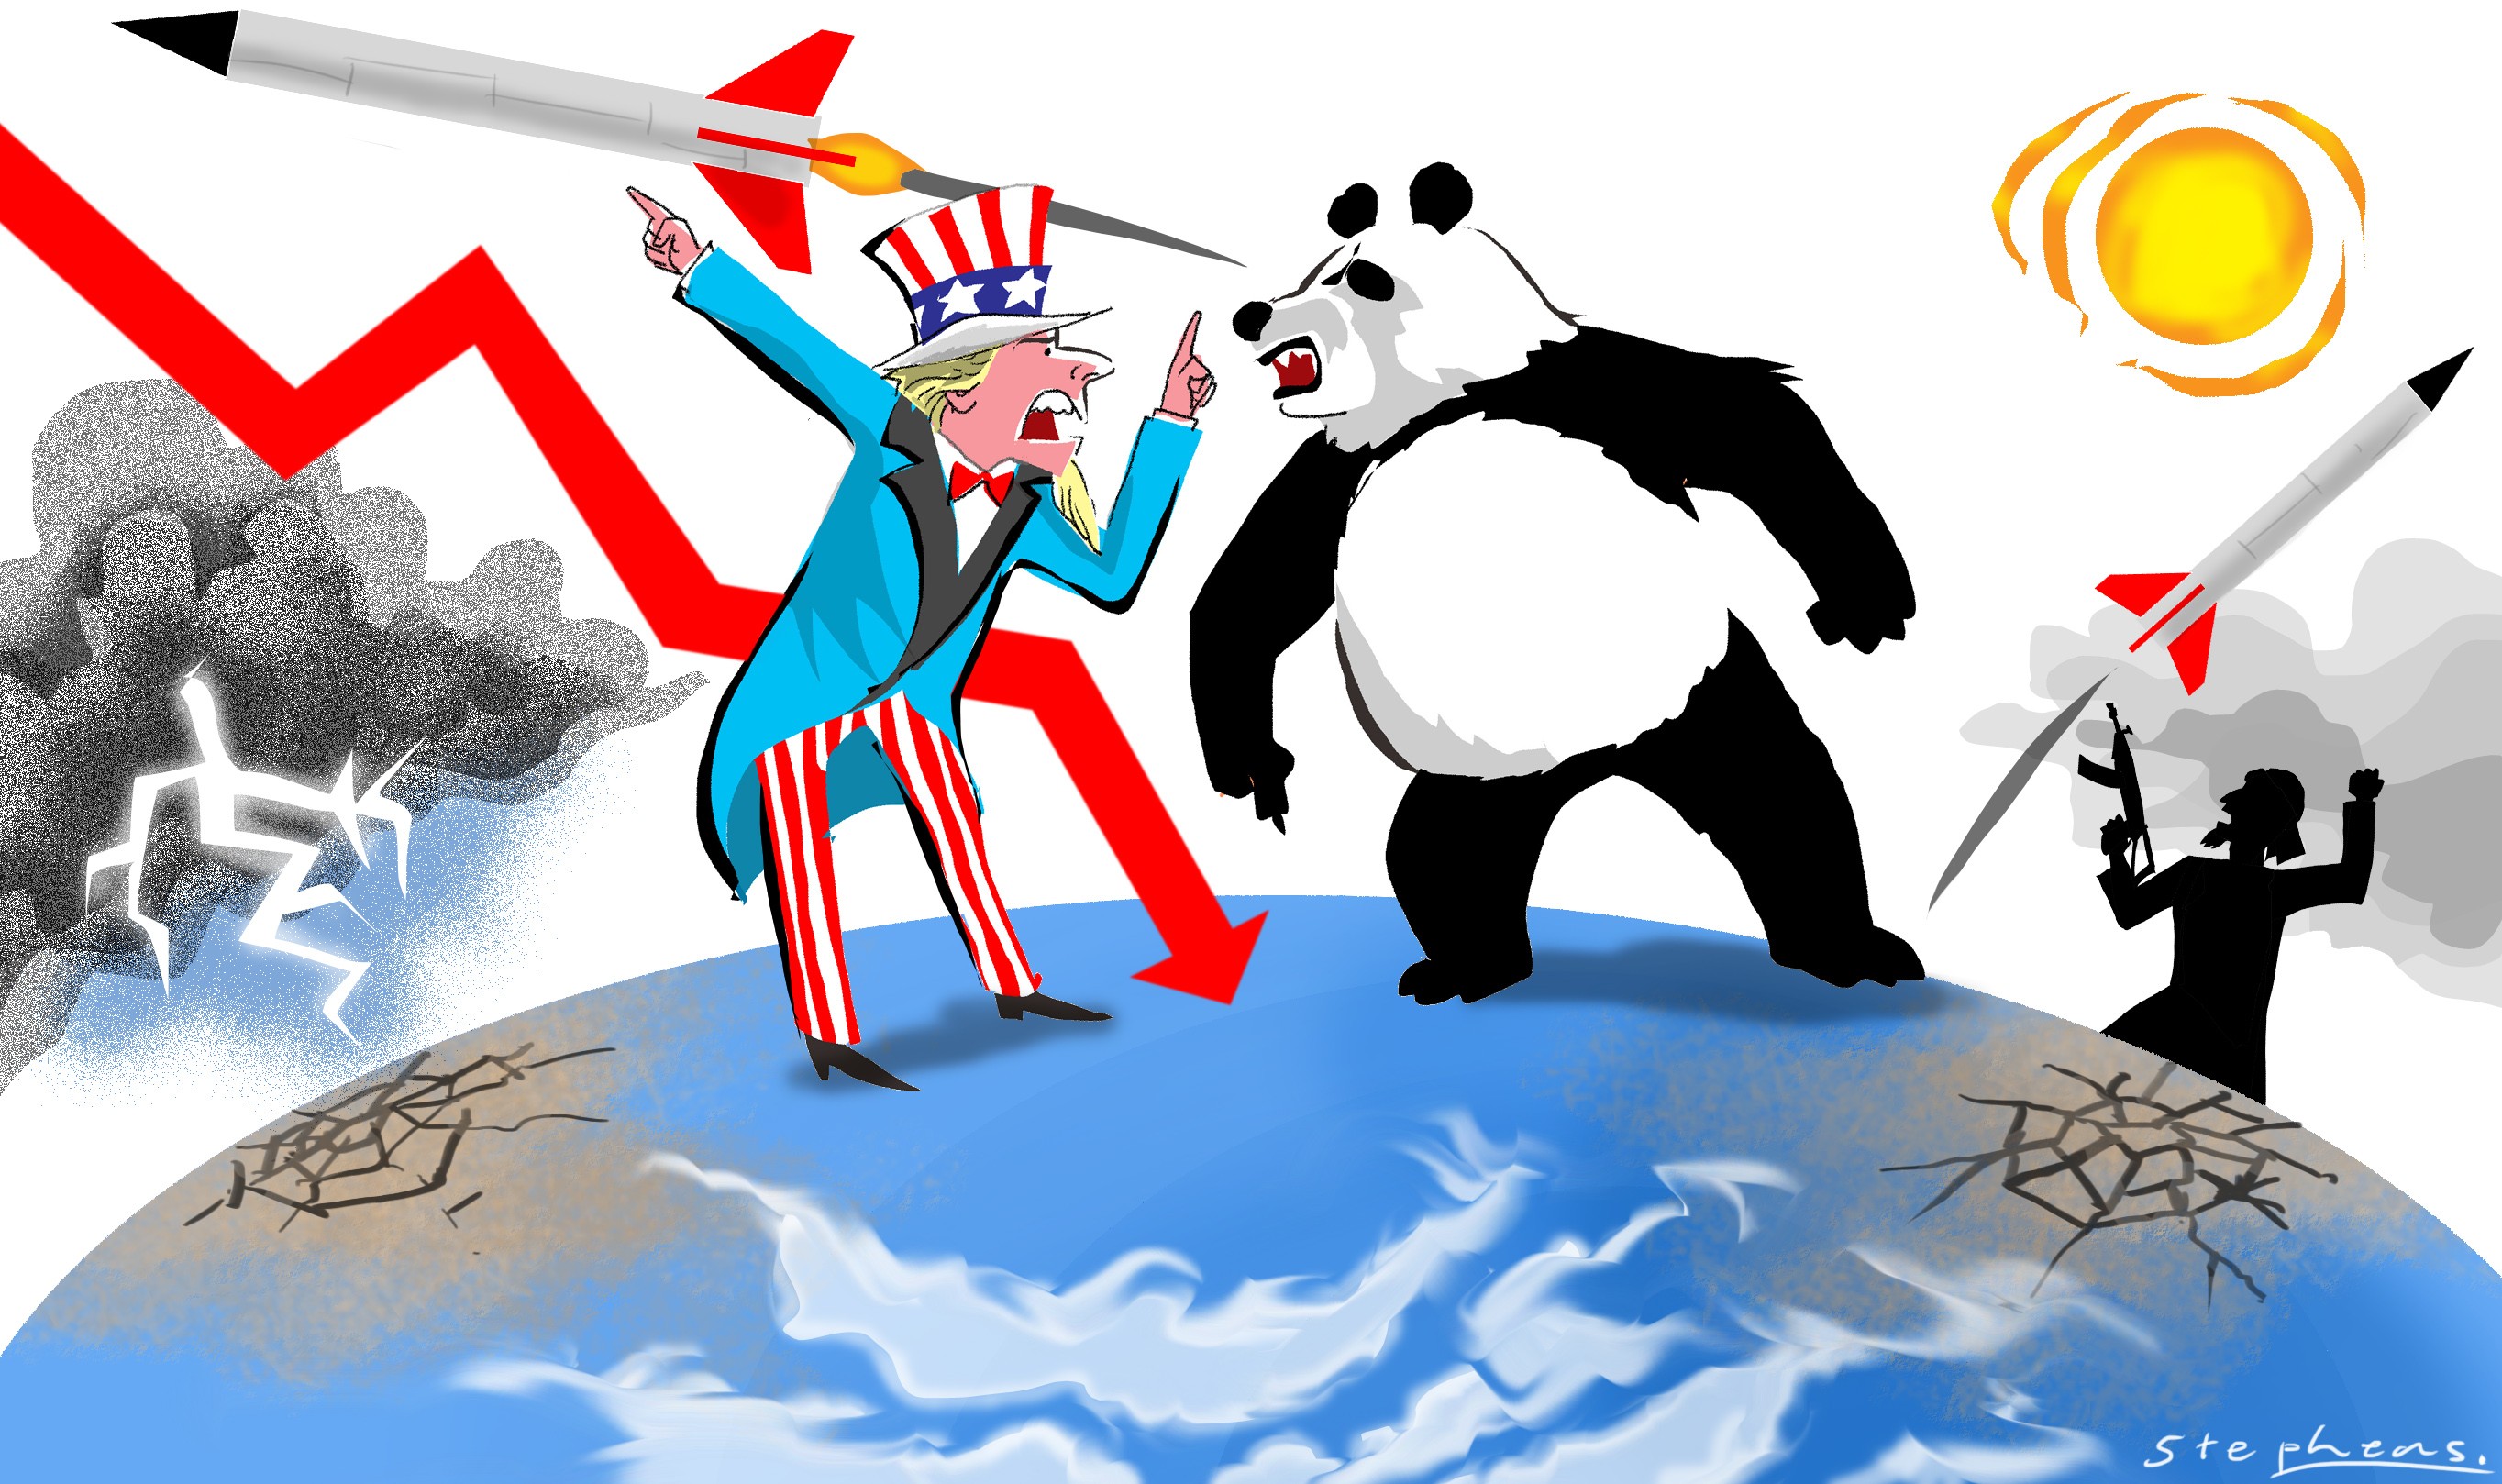 This century’s pressing transnational issues – terrorism, economic crisis, climate change, pandemics, artificial intelligence and peace on the Korean peninsula – cannot be solved if the US treats China as an enemy. Illustration: Craig Stephens